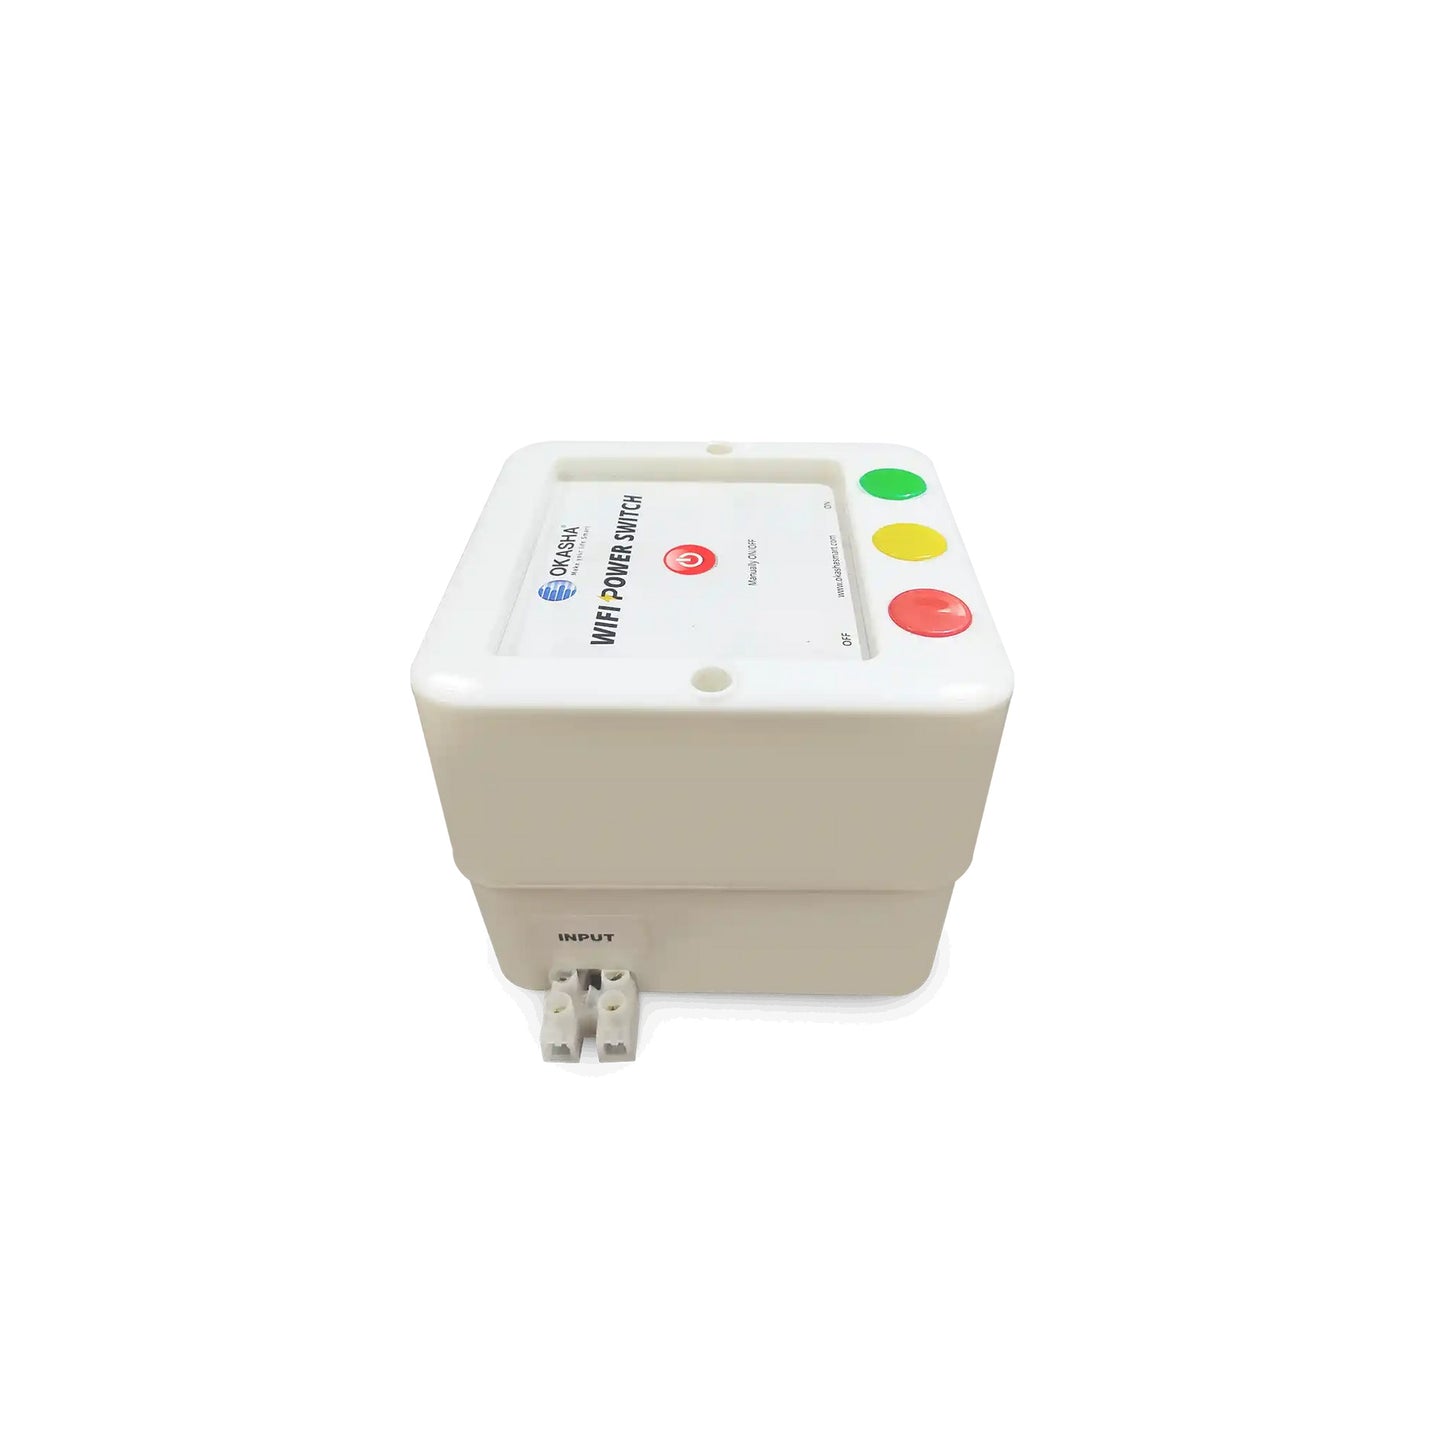 Power Switch 25Amp White Color Price in Pakistan 